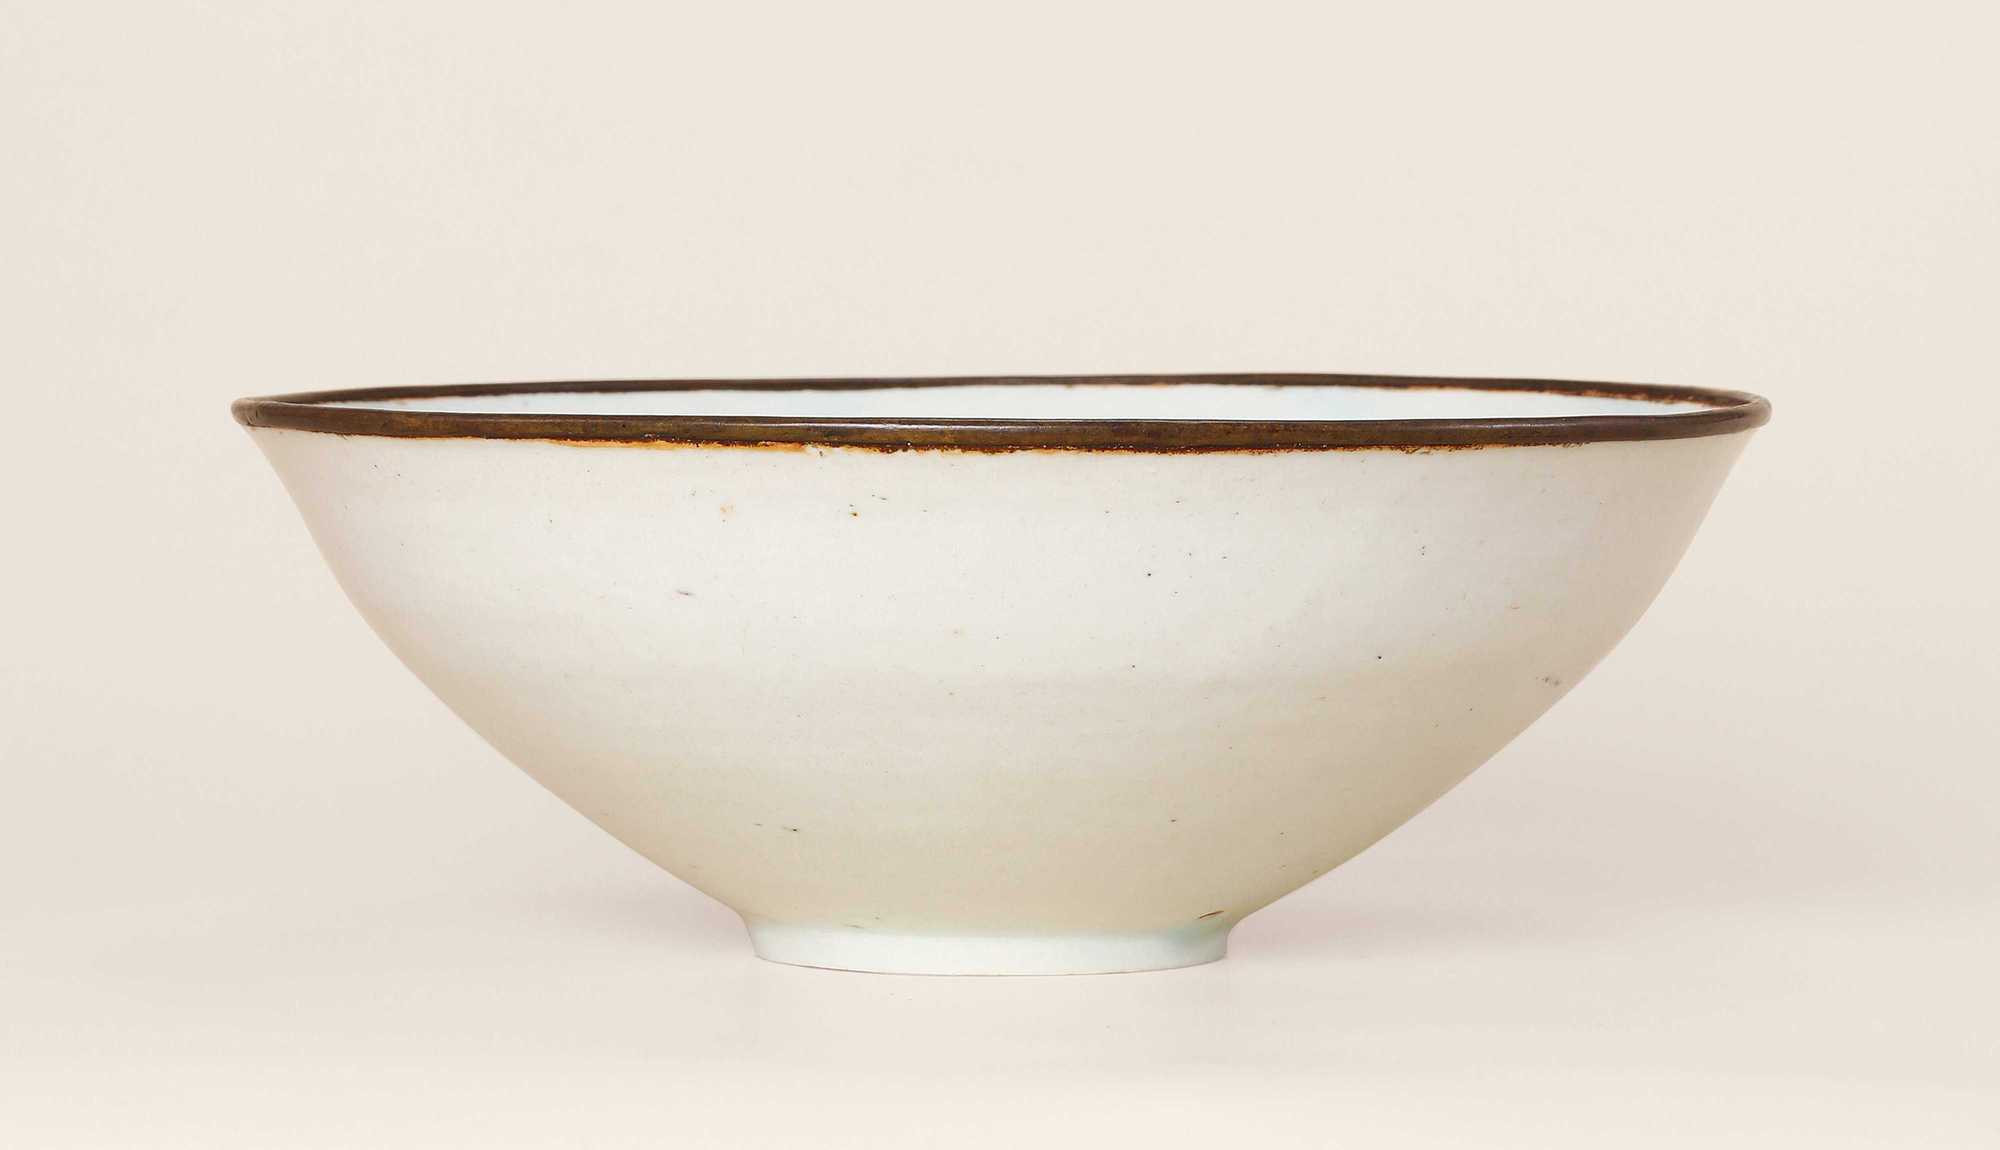 A JINGDEZHEN WARE WHITE GLAZED WITH MOUDLED BOWL